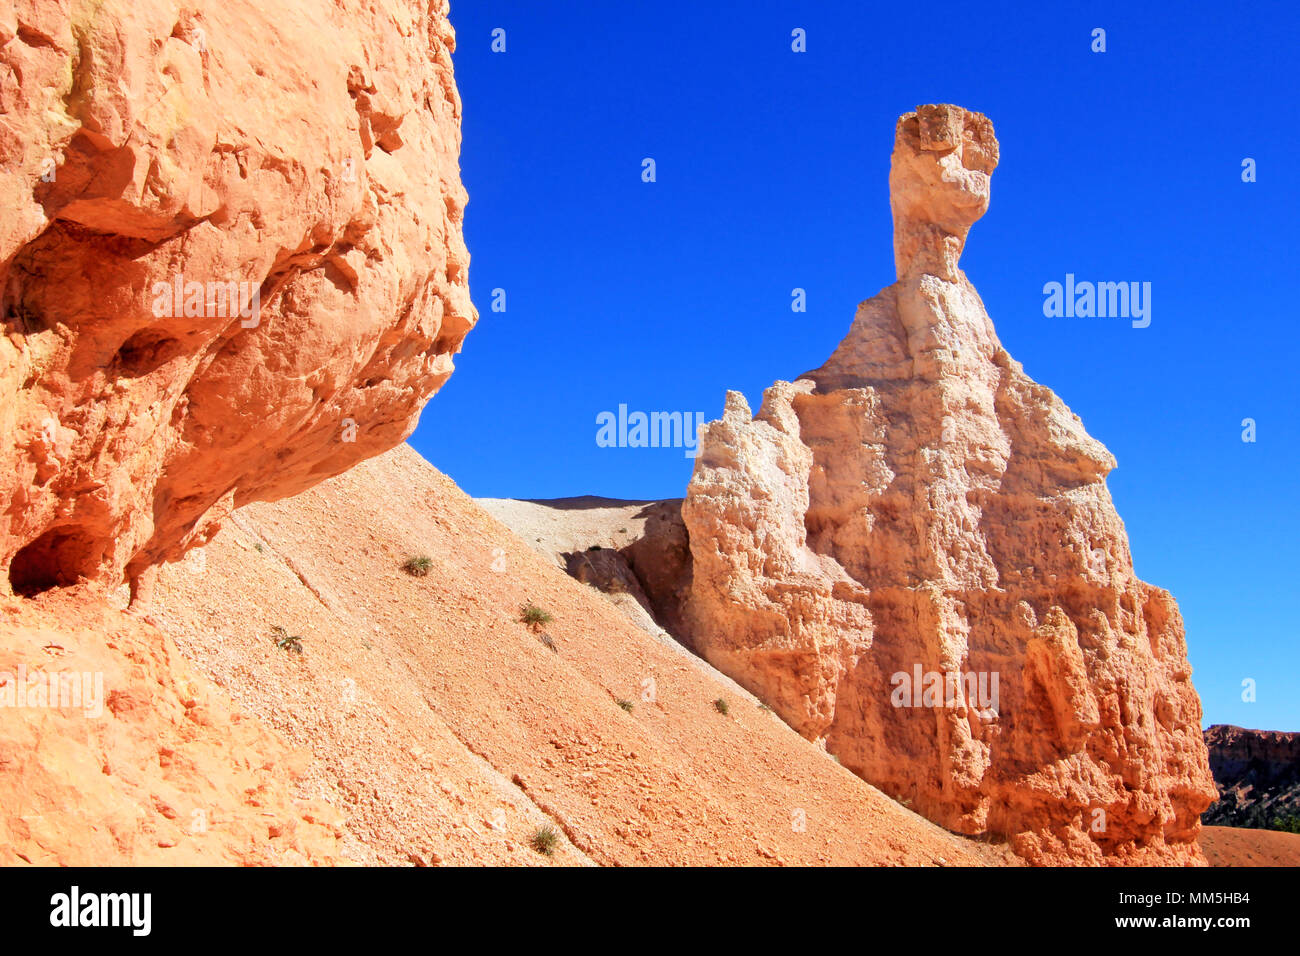 Hoodoo at Queens Garden in Bryce Canyon National Park, Utah, United States Stock Photo